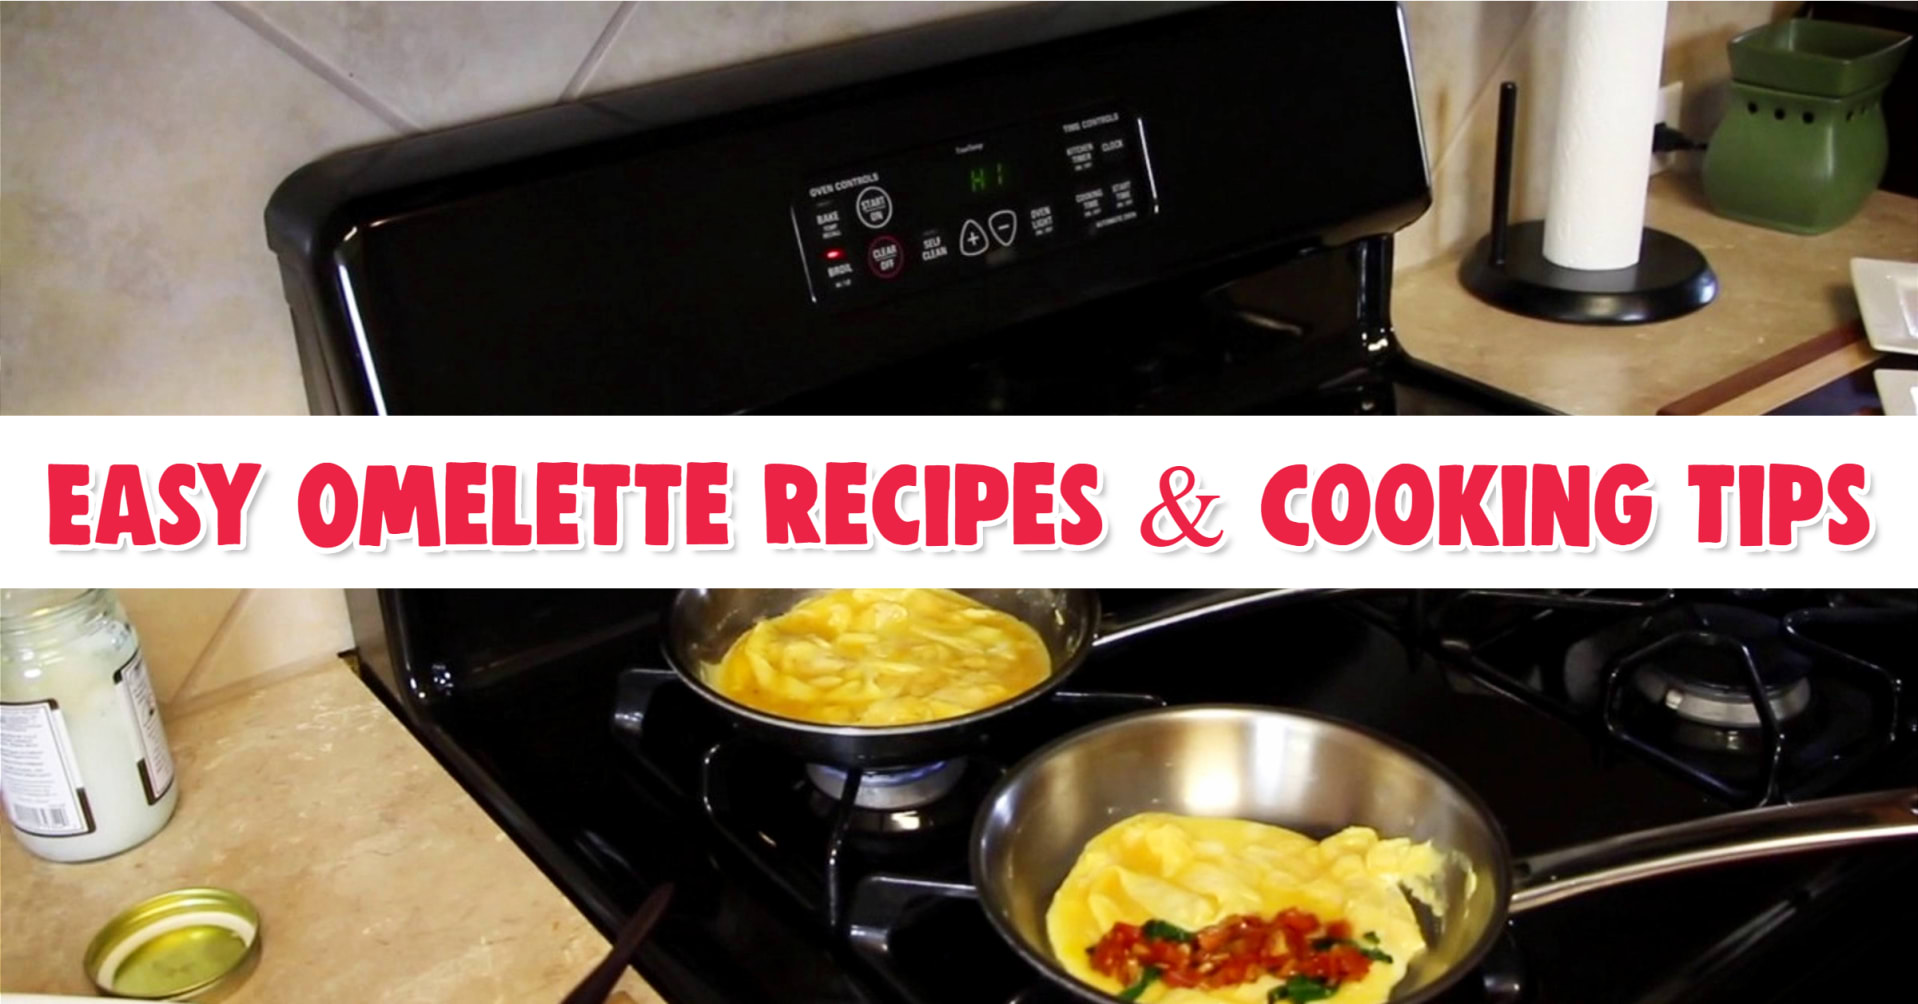 Easy Omelette Recipes - French Omelette Stainless Steel Pan - How to make omelettes easy video - Omelette recipes - how to make an omelette that doesn't stick to the pan - cook omelette in stainless steel pan